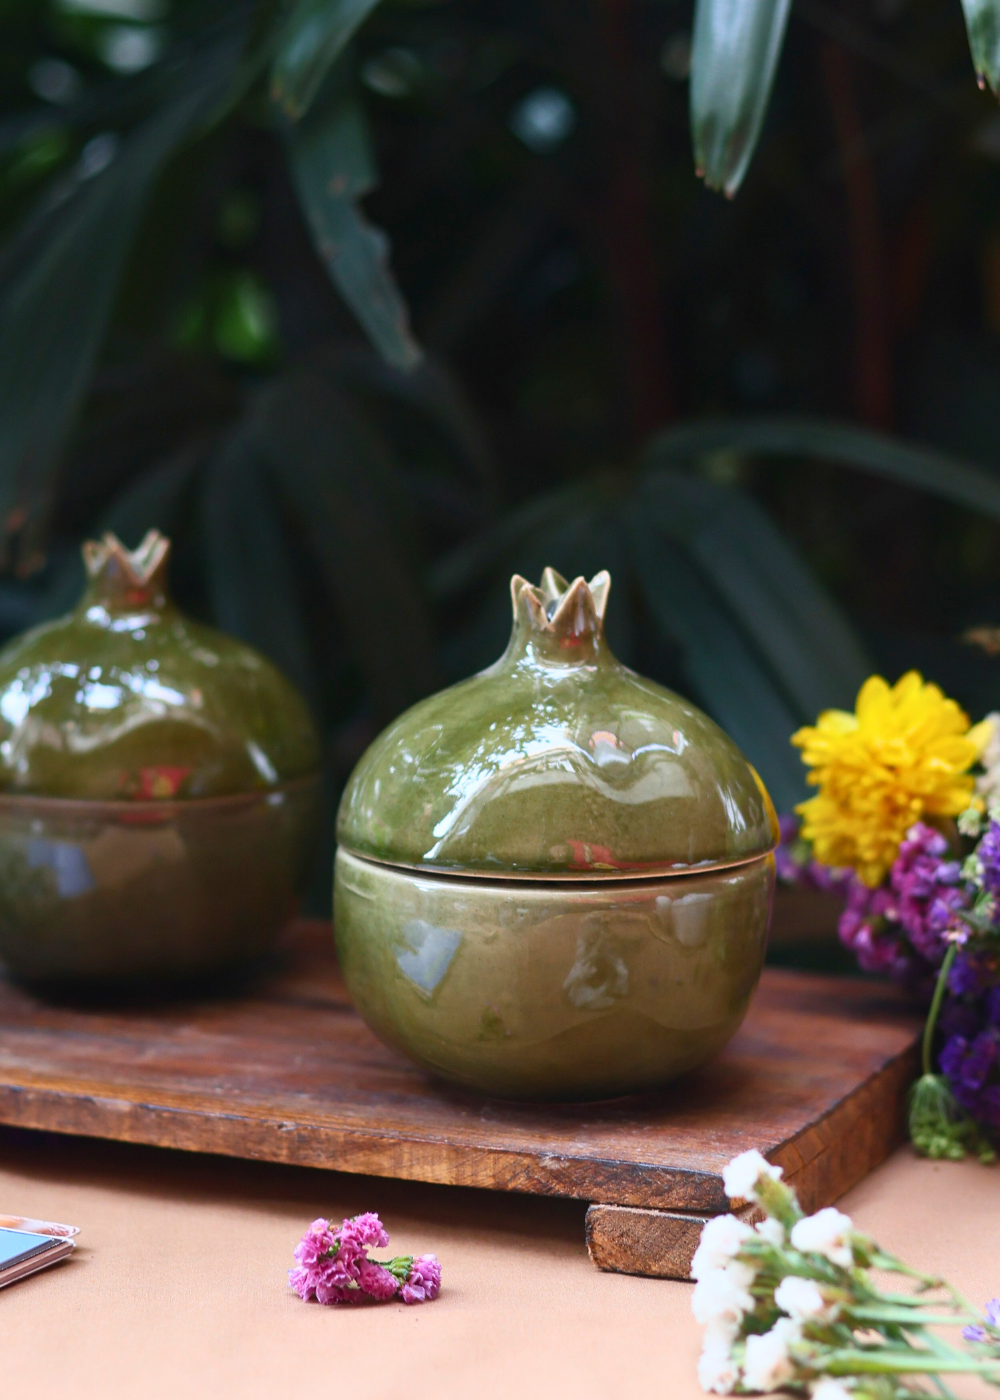 olive green anar jar with beautiful olive green color